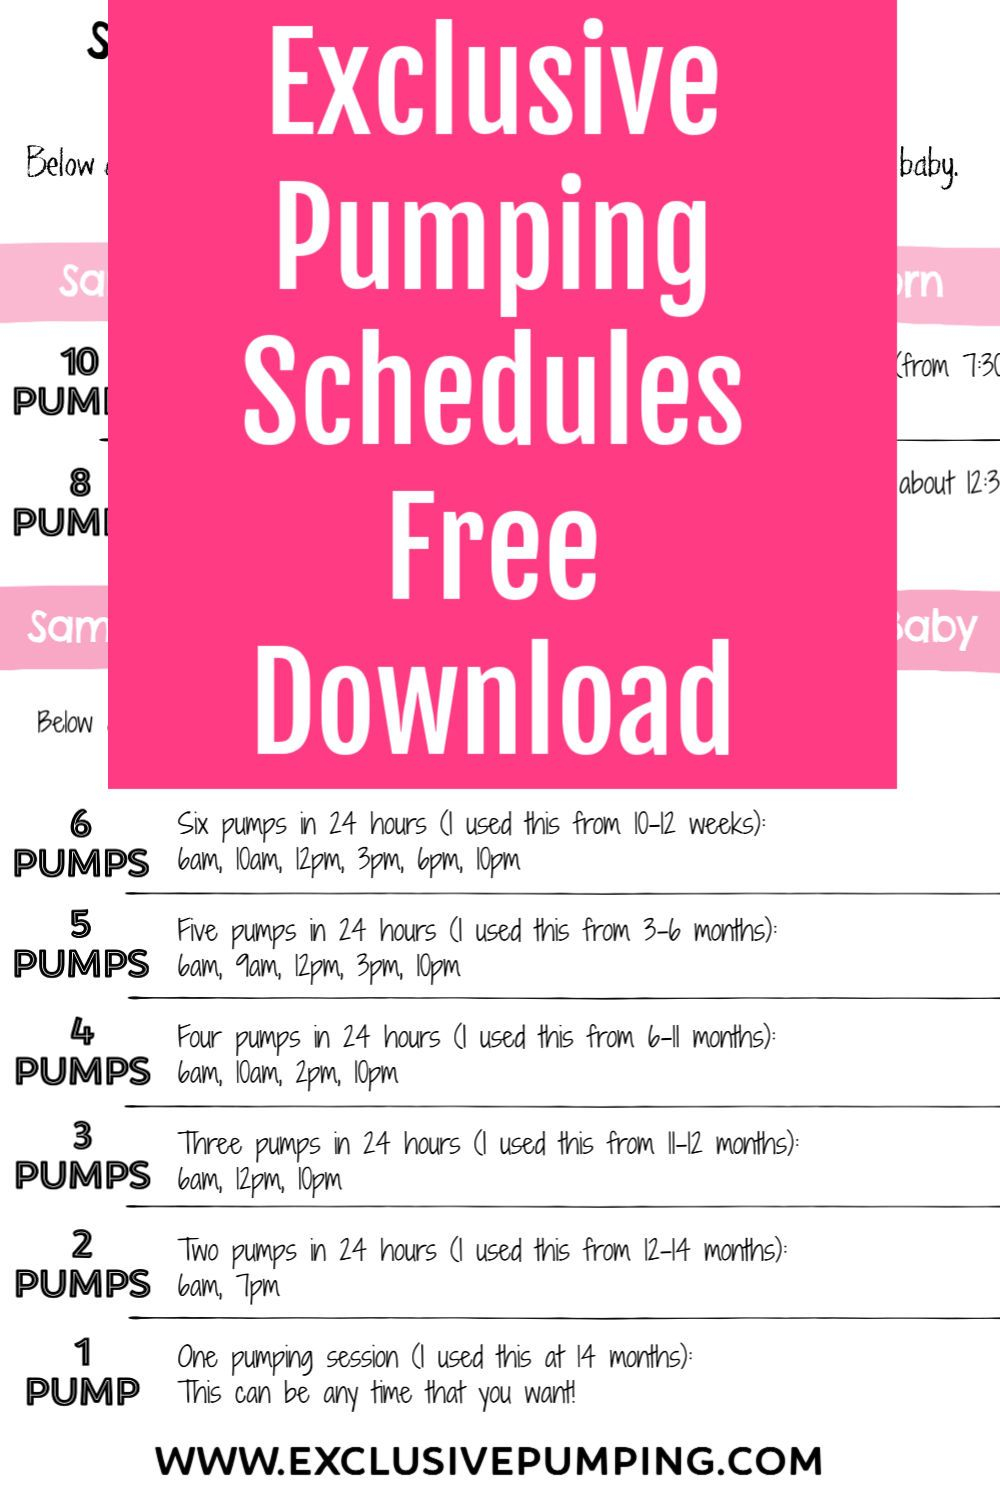 Sample Exclusive Pumping Schedules Pumping Schedule 